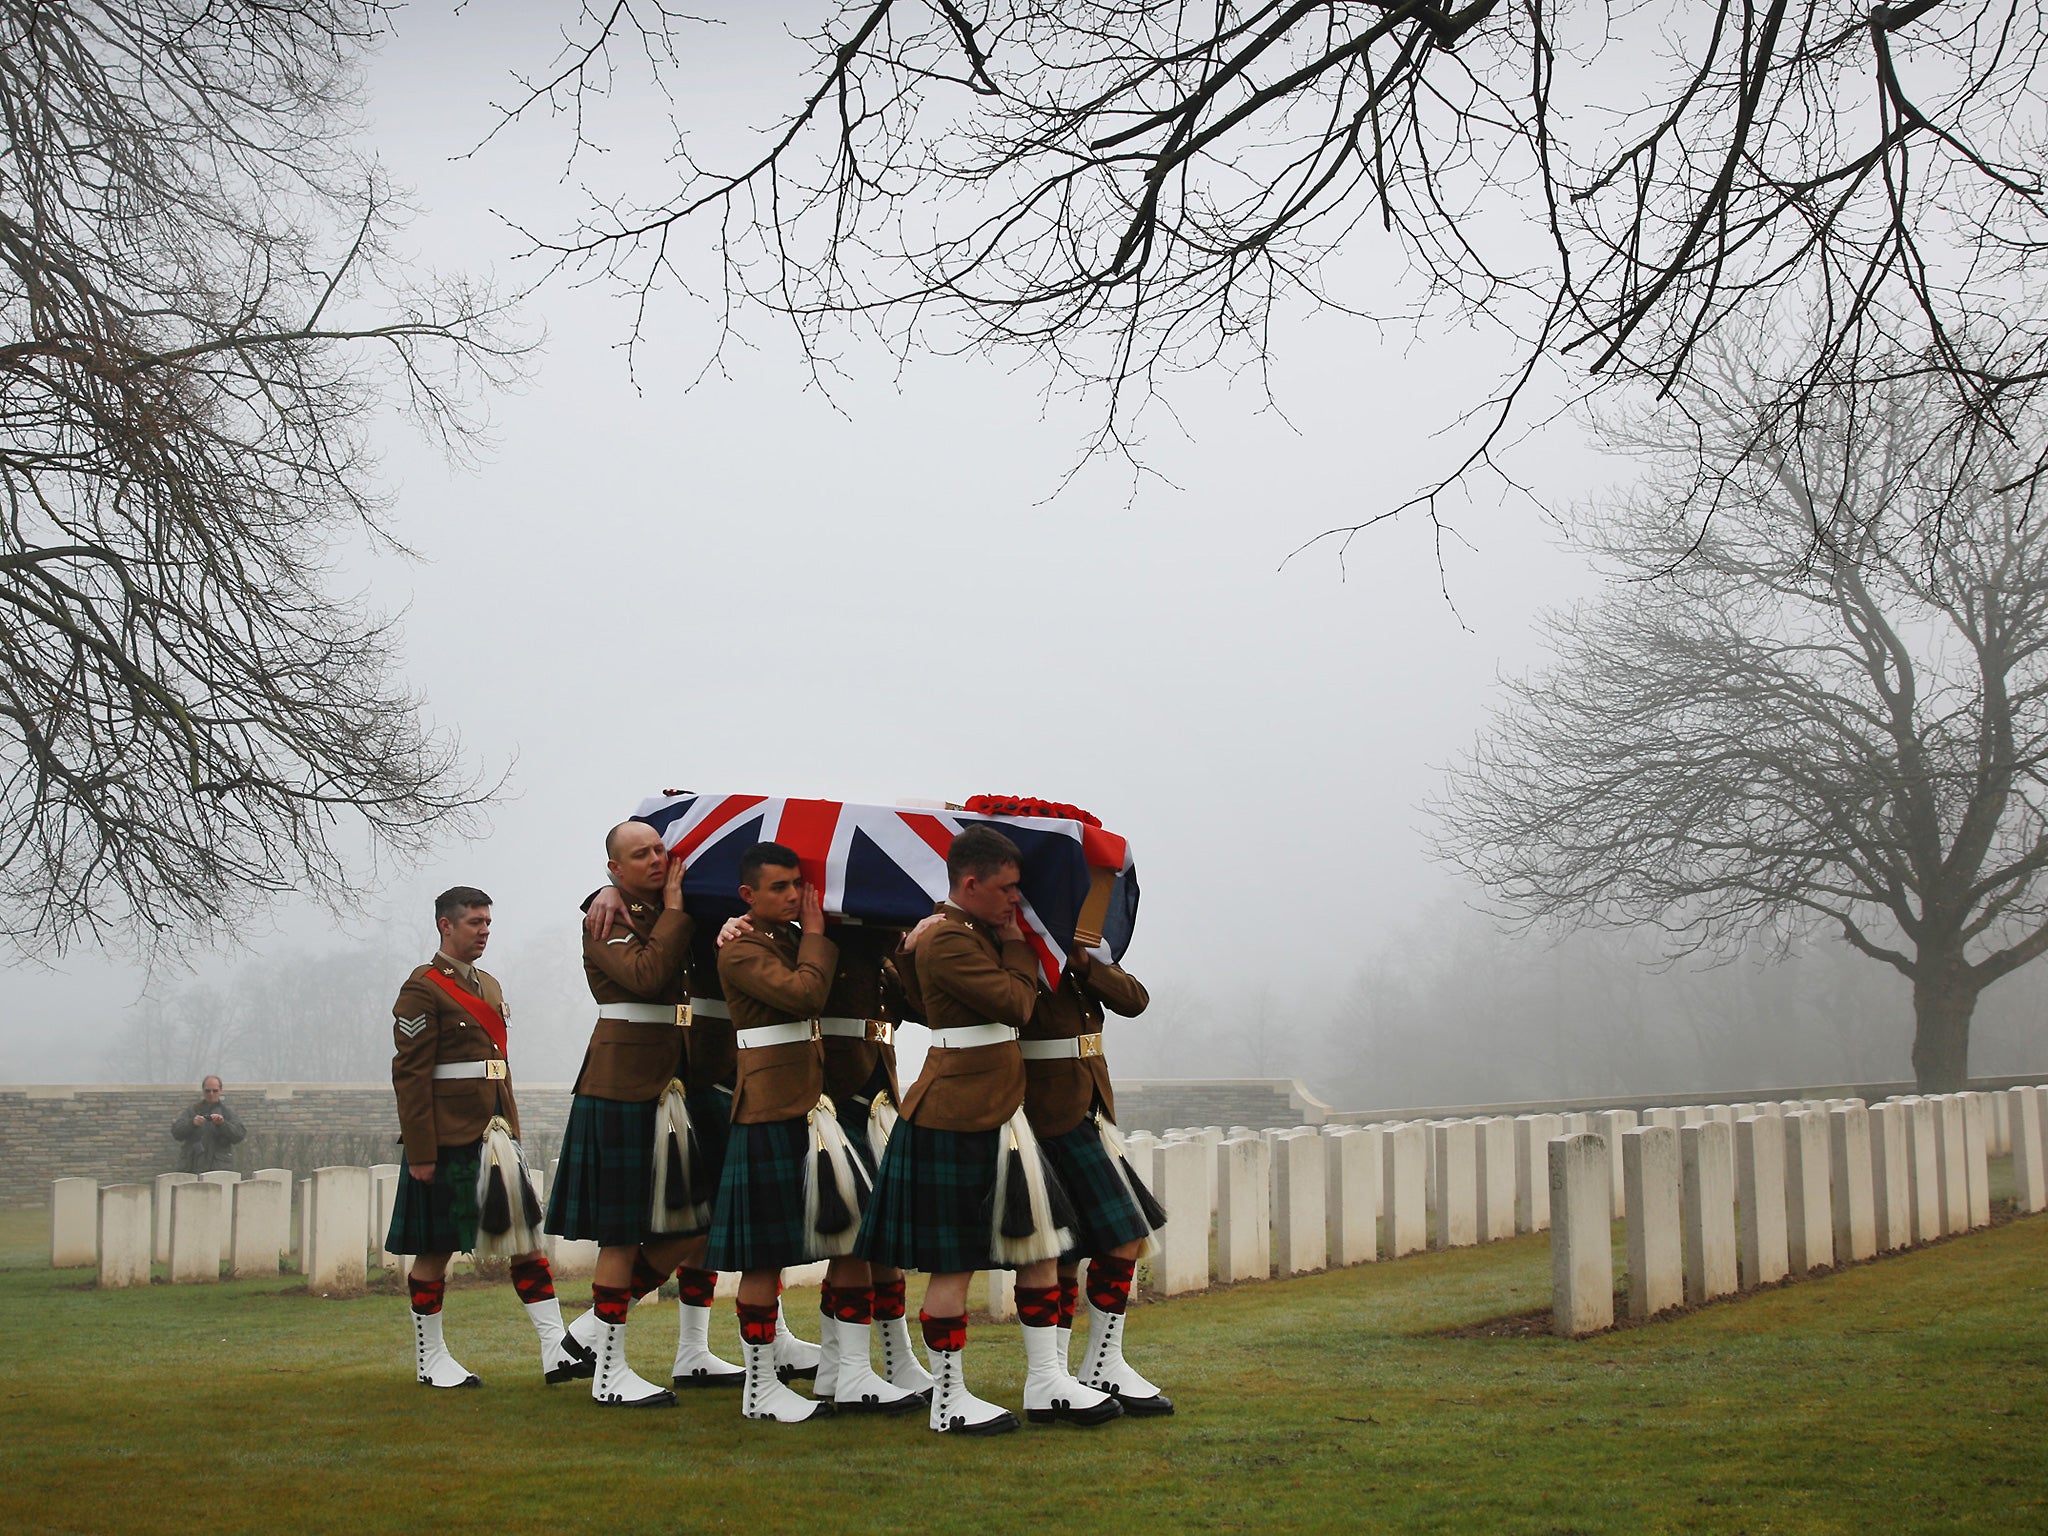 Soldiers of The 2nd Battalion The Royal Regiment of Scotland carry the coffin of Private William McAleer, from the 7th Battalion the Royal Scottish Fusiliers during a re-burial ceremony Loos British Cemetery in Loos-en-Gohelle, France. Almost 100 years af